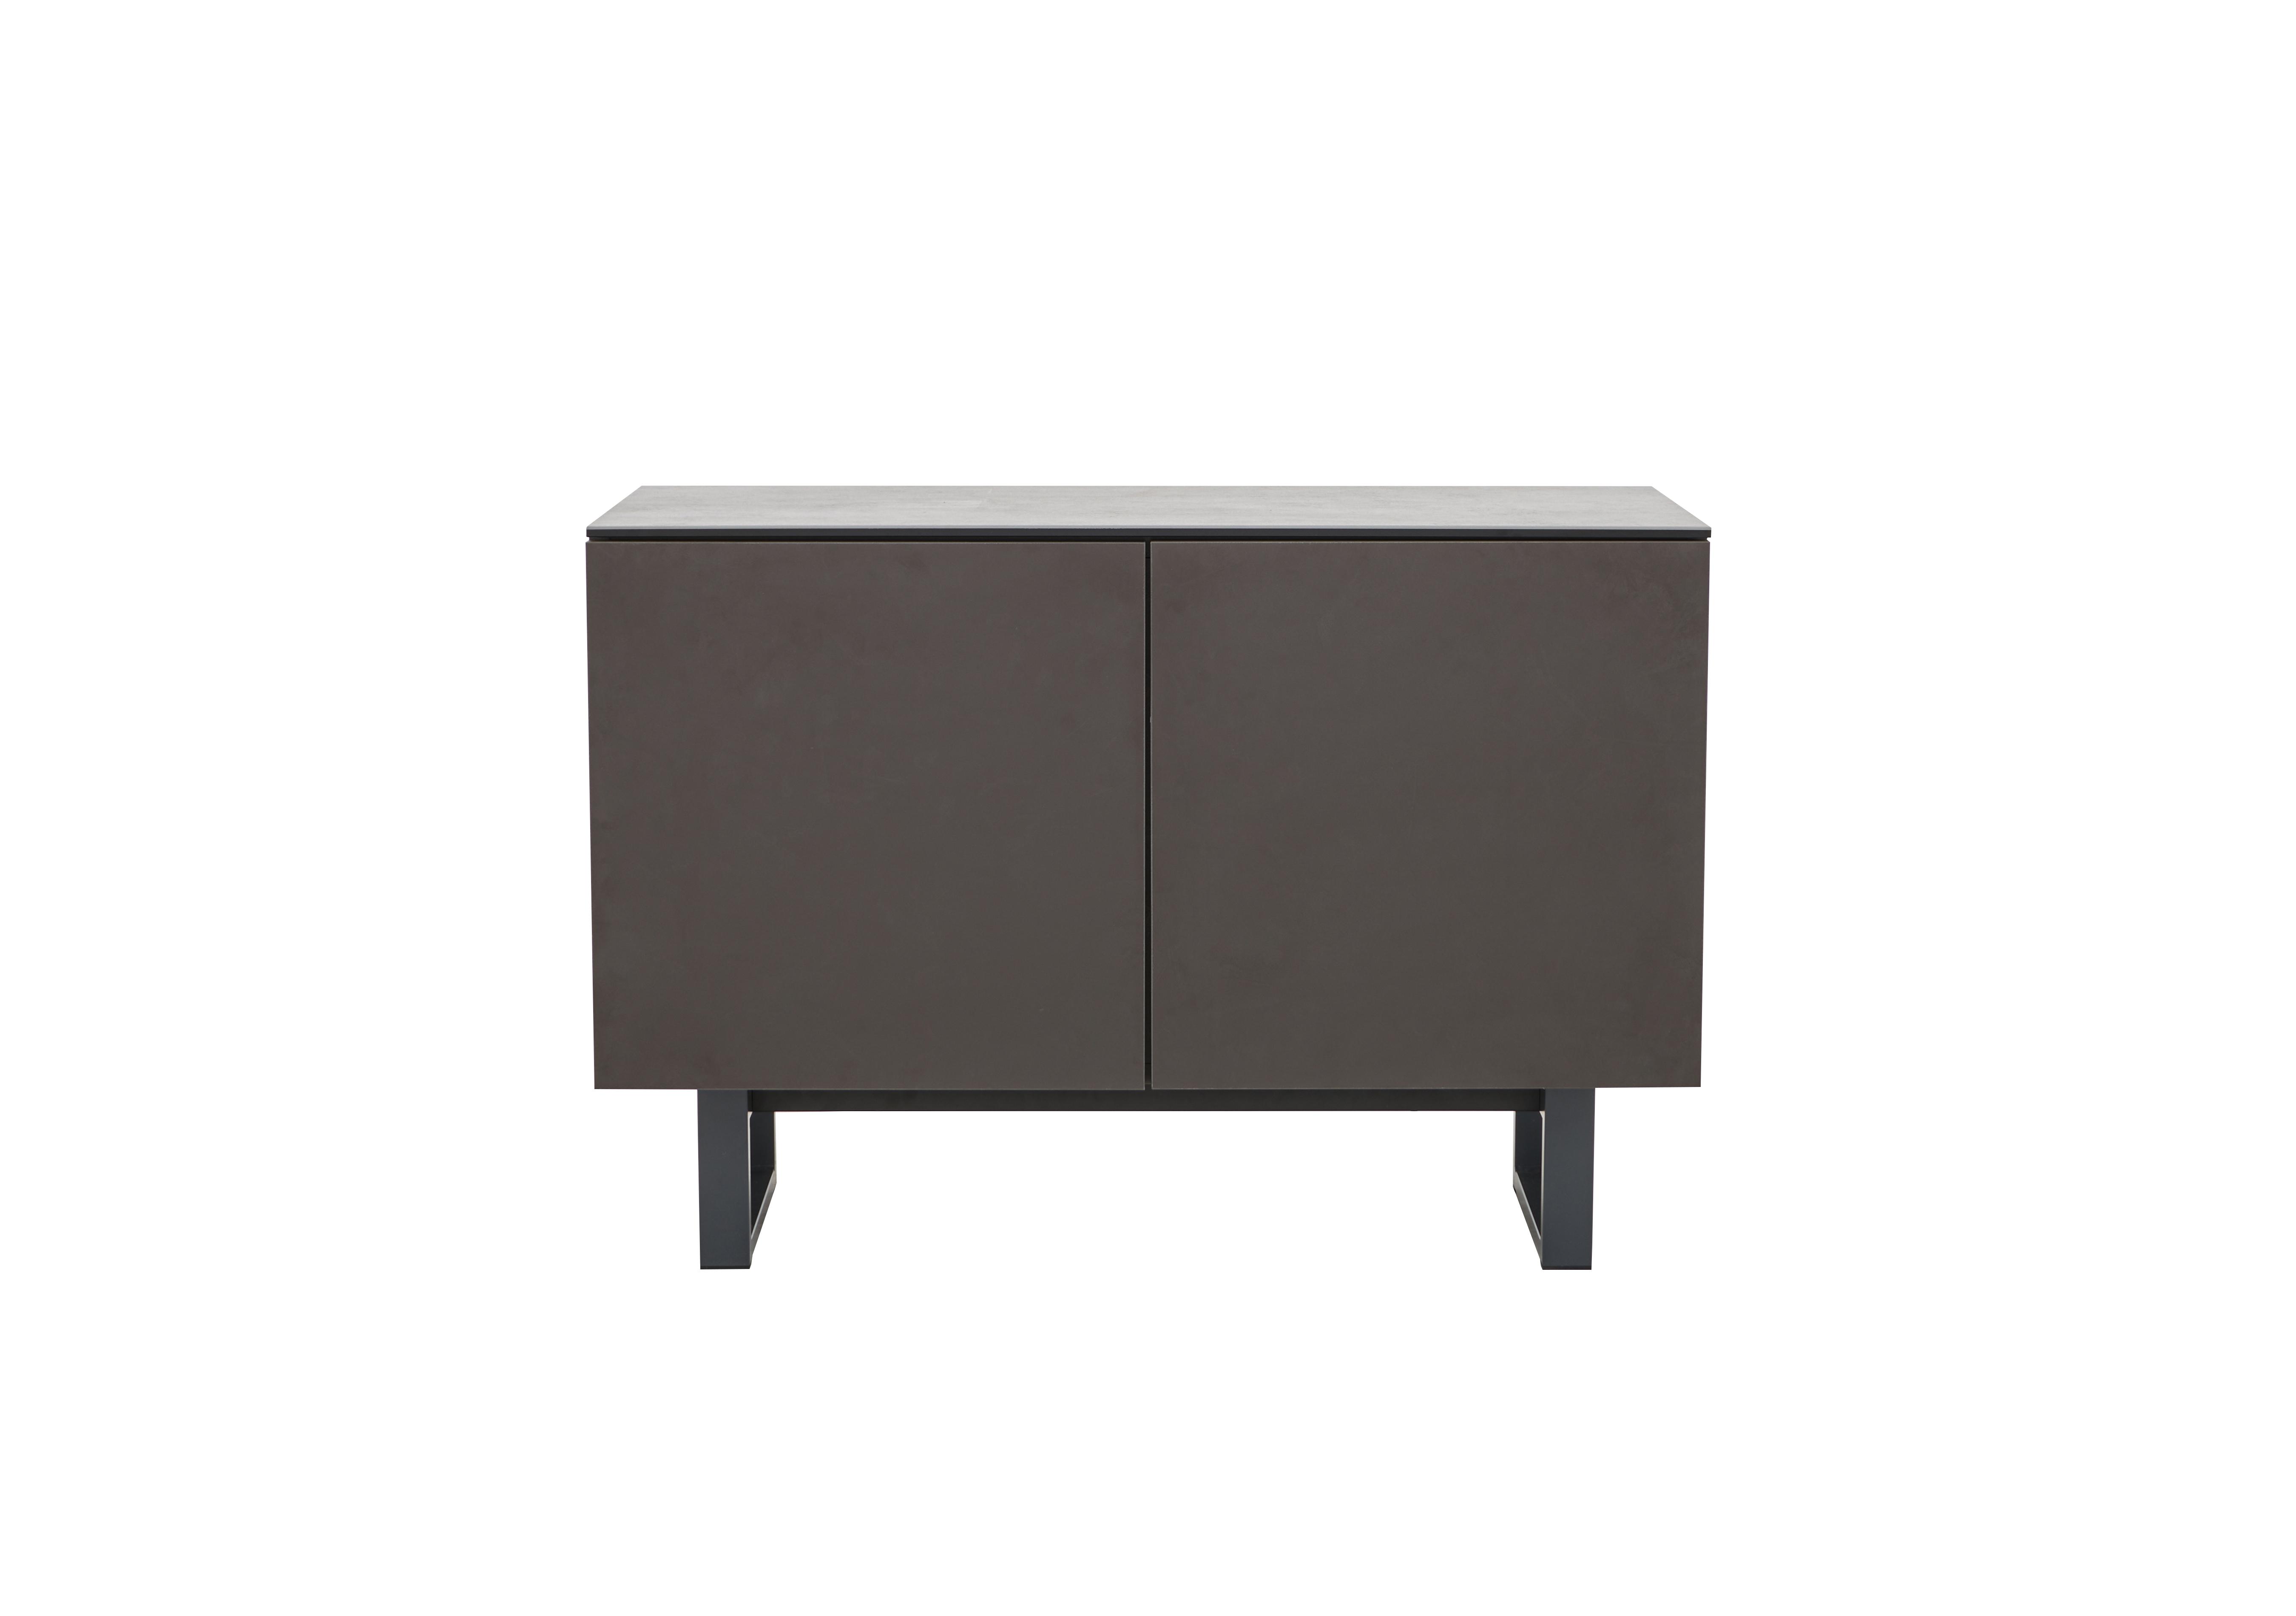 Baron Sideboard in Cement/Grey on Furniture Village